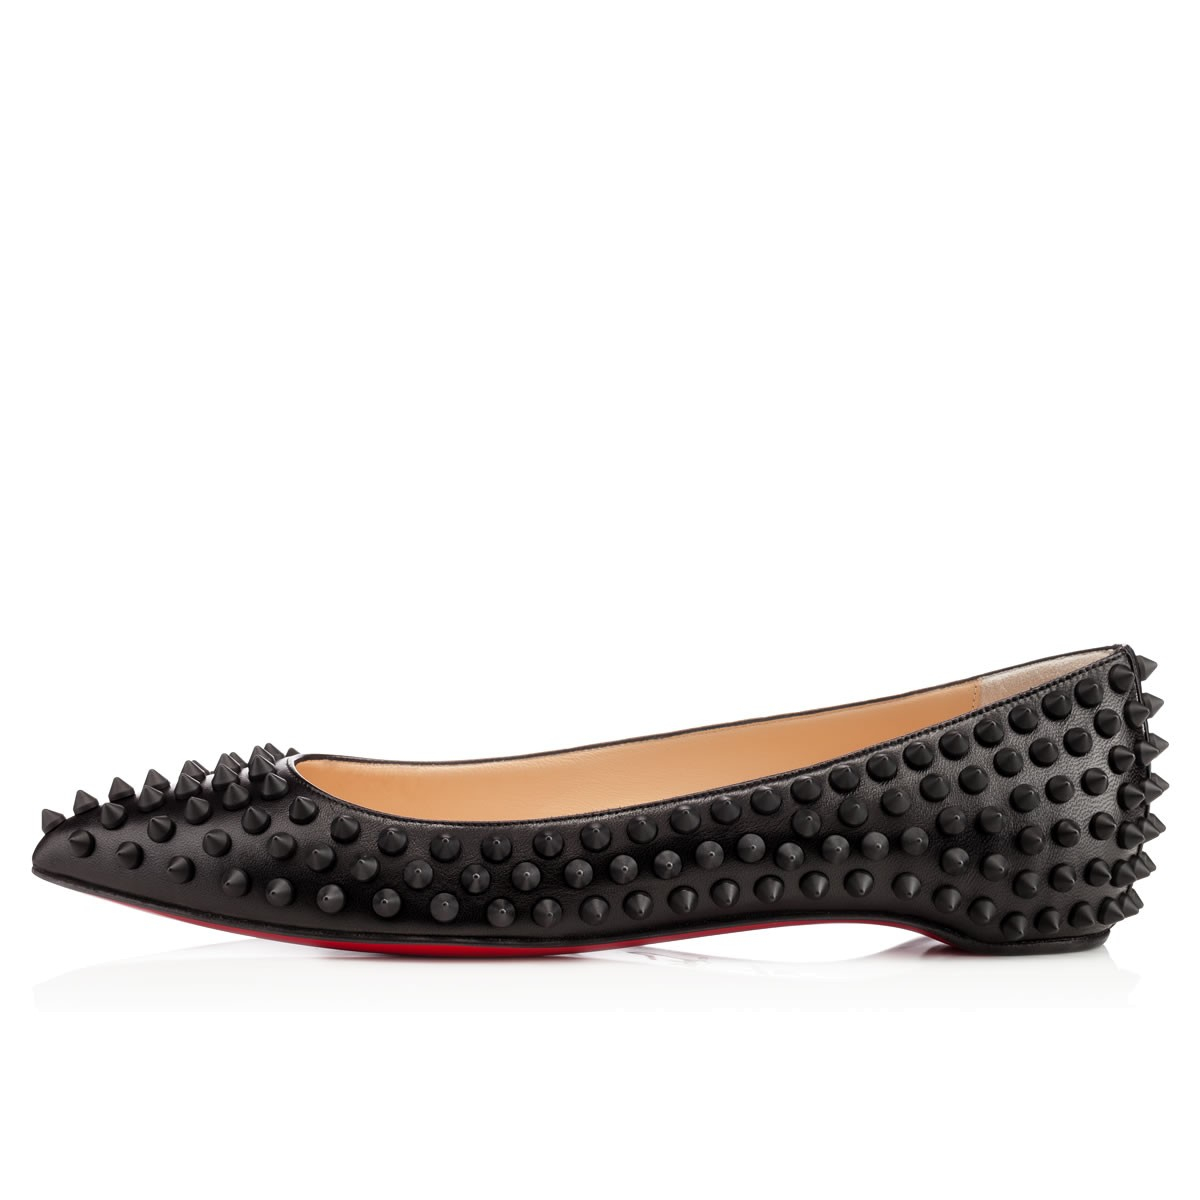 mens red bottom tennis shoes - Peony Design ? christian louboutin pigalle spiked metallic leather ...